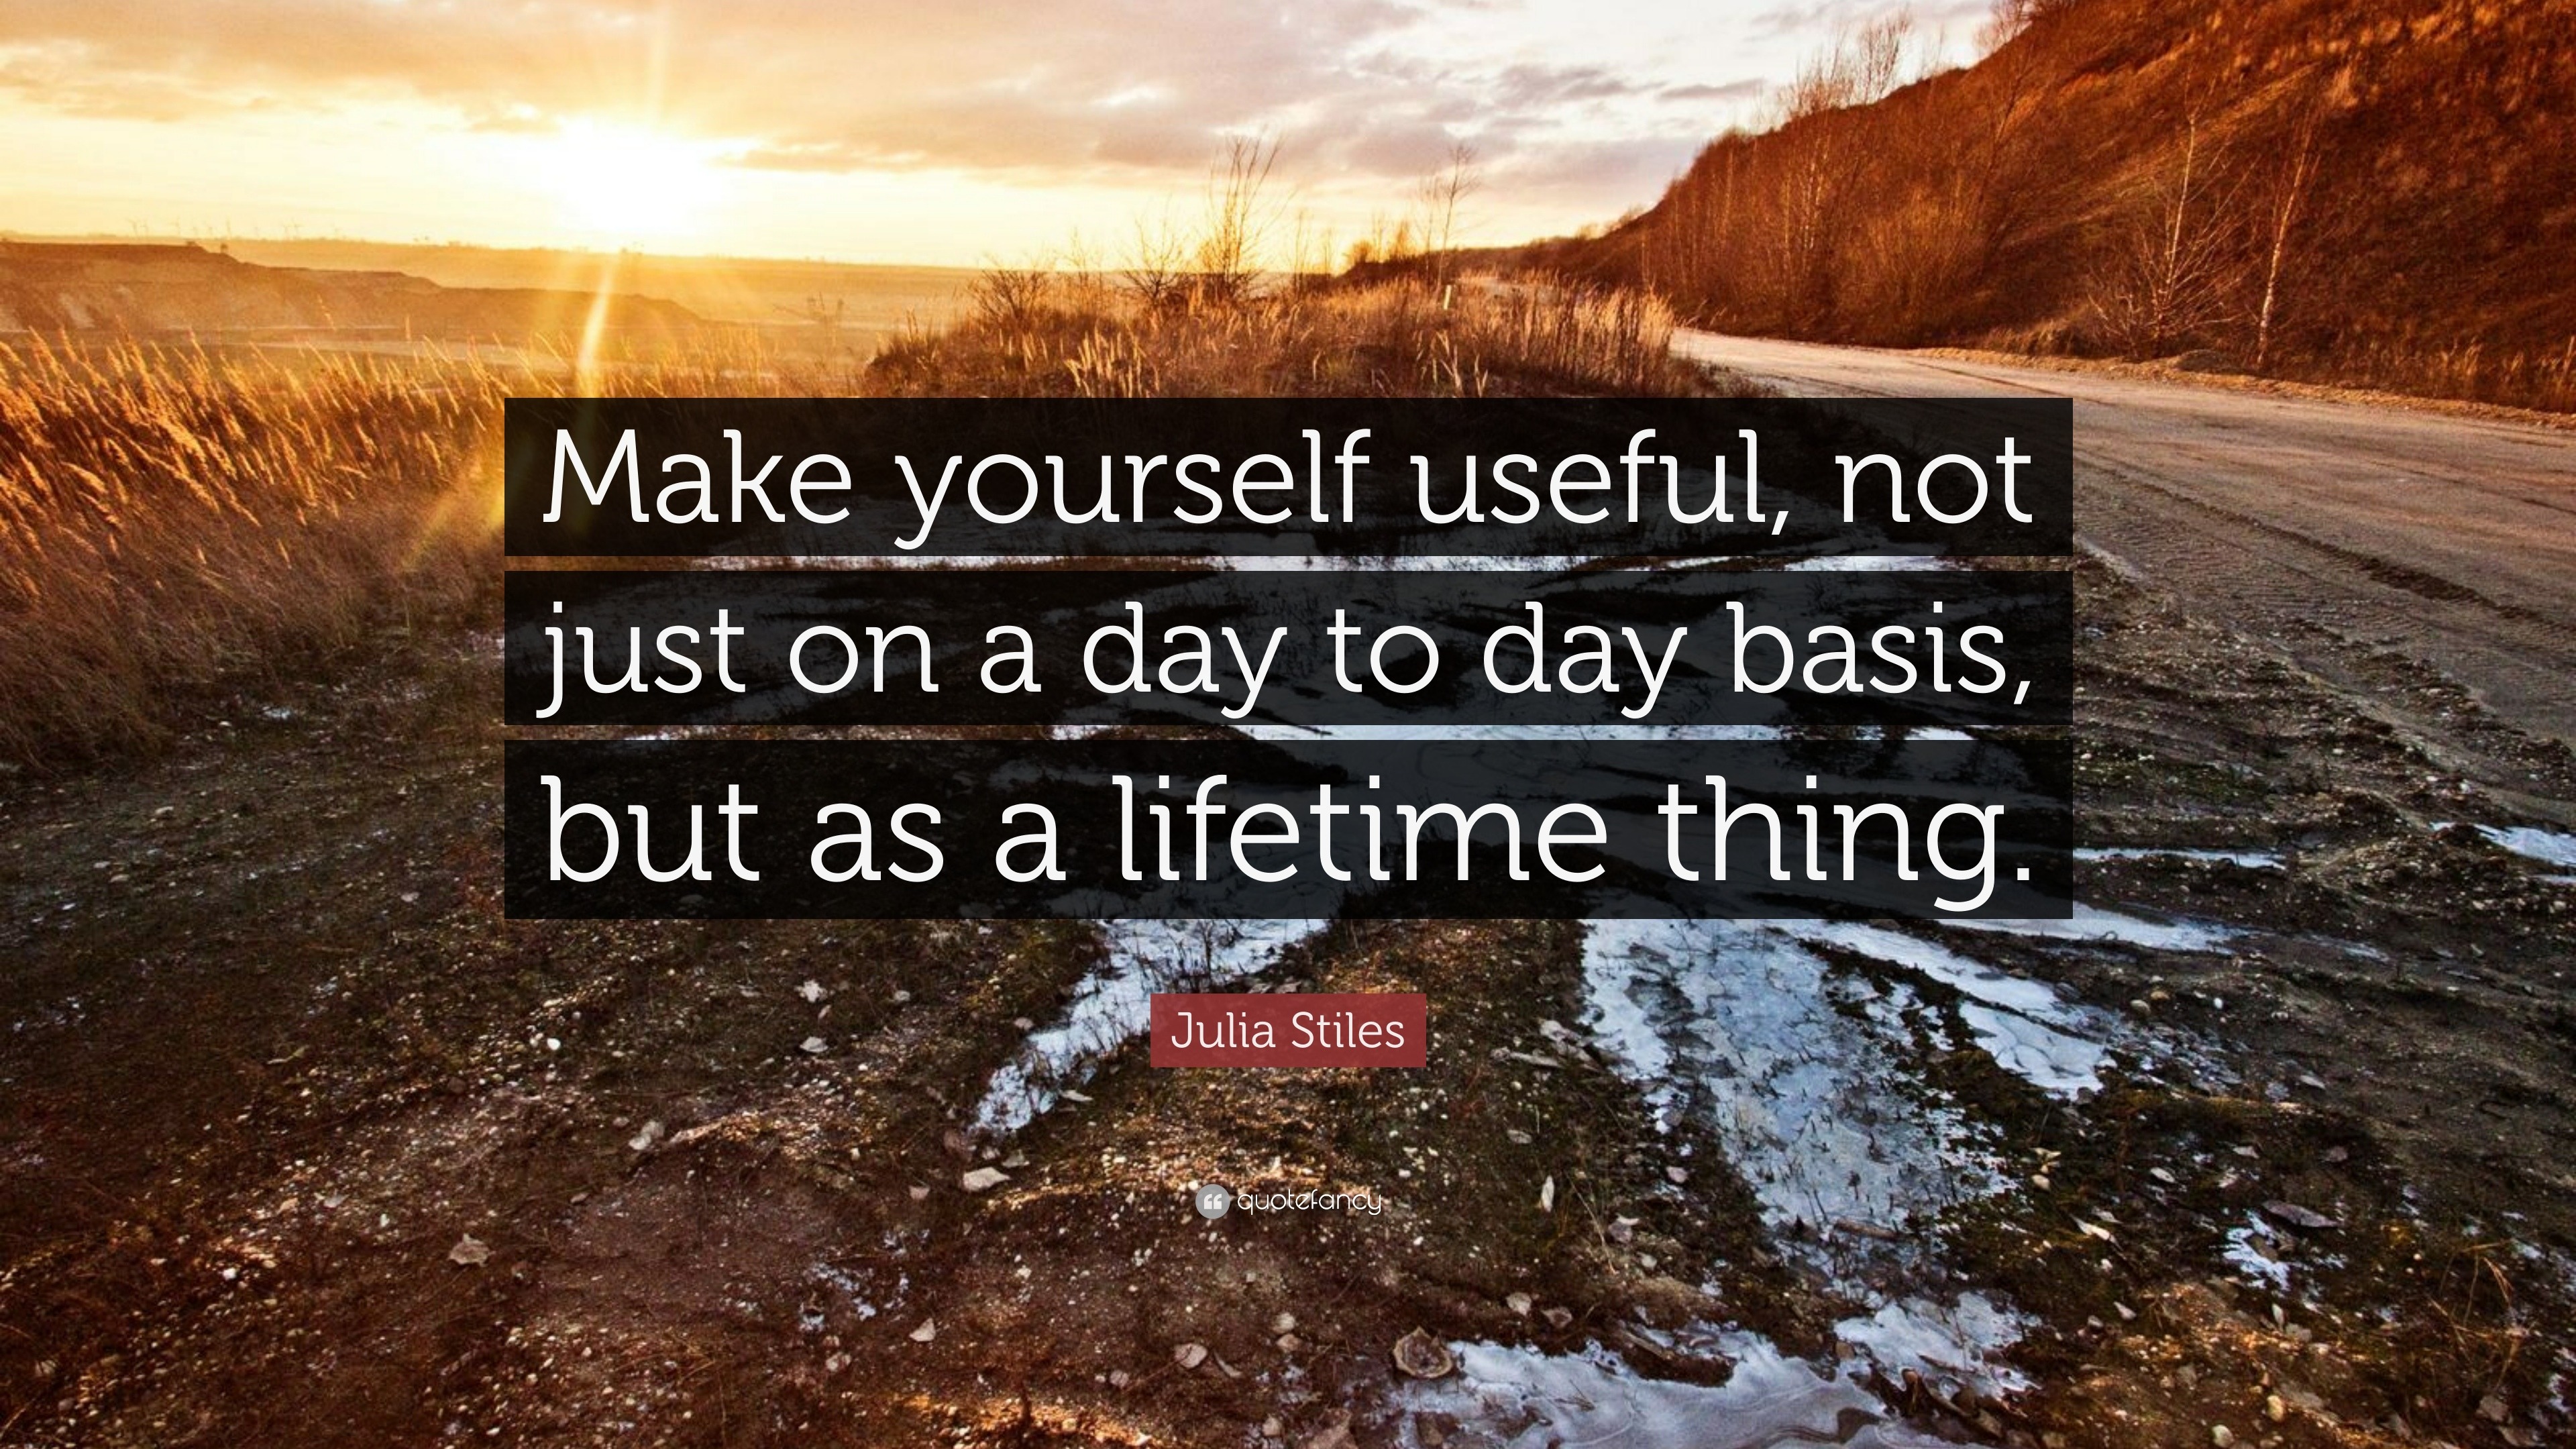 Julia Stiles Quote: “Make yourself useful, not just on a day to day basis,  but as a lifetime thing.” (10 wallpapers) - Quotefancy